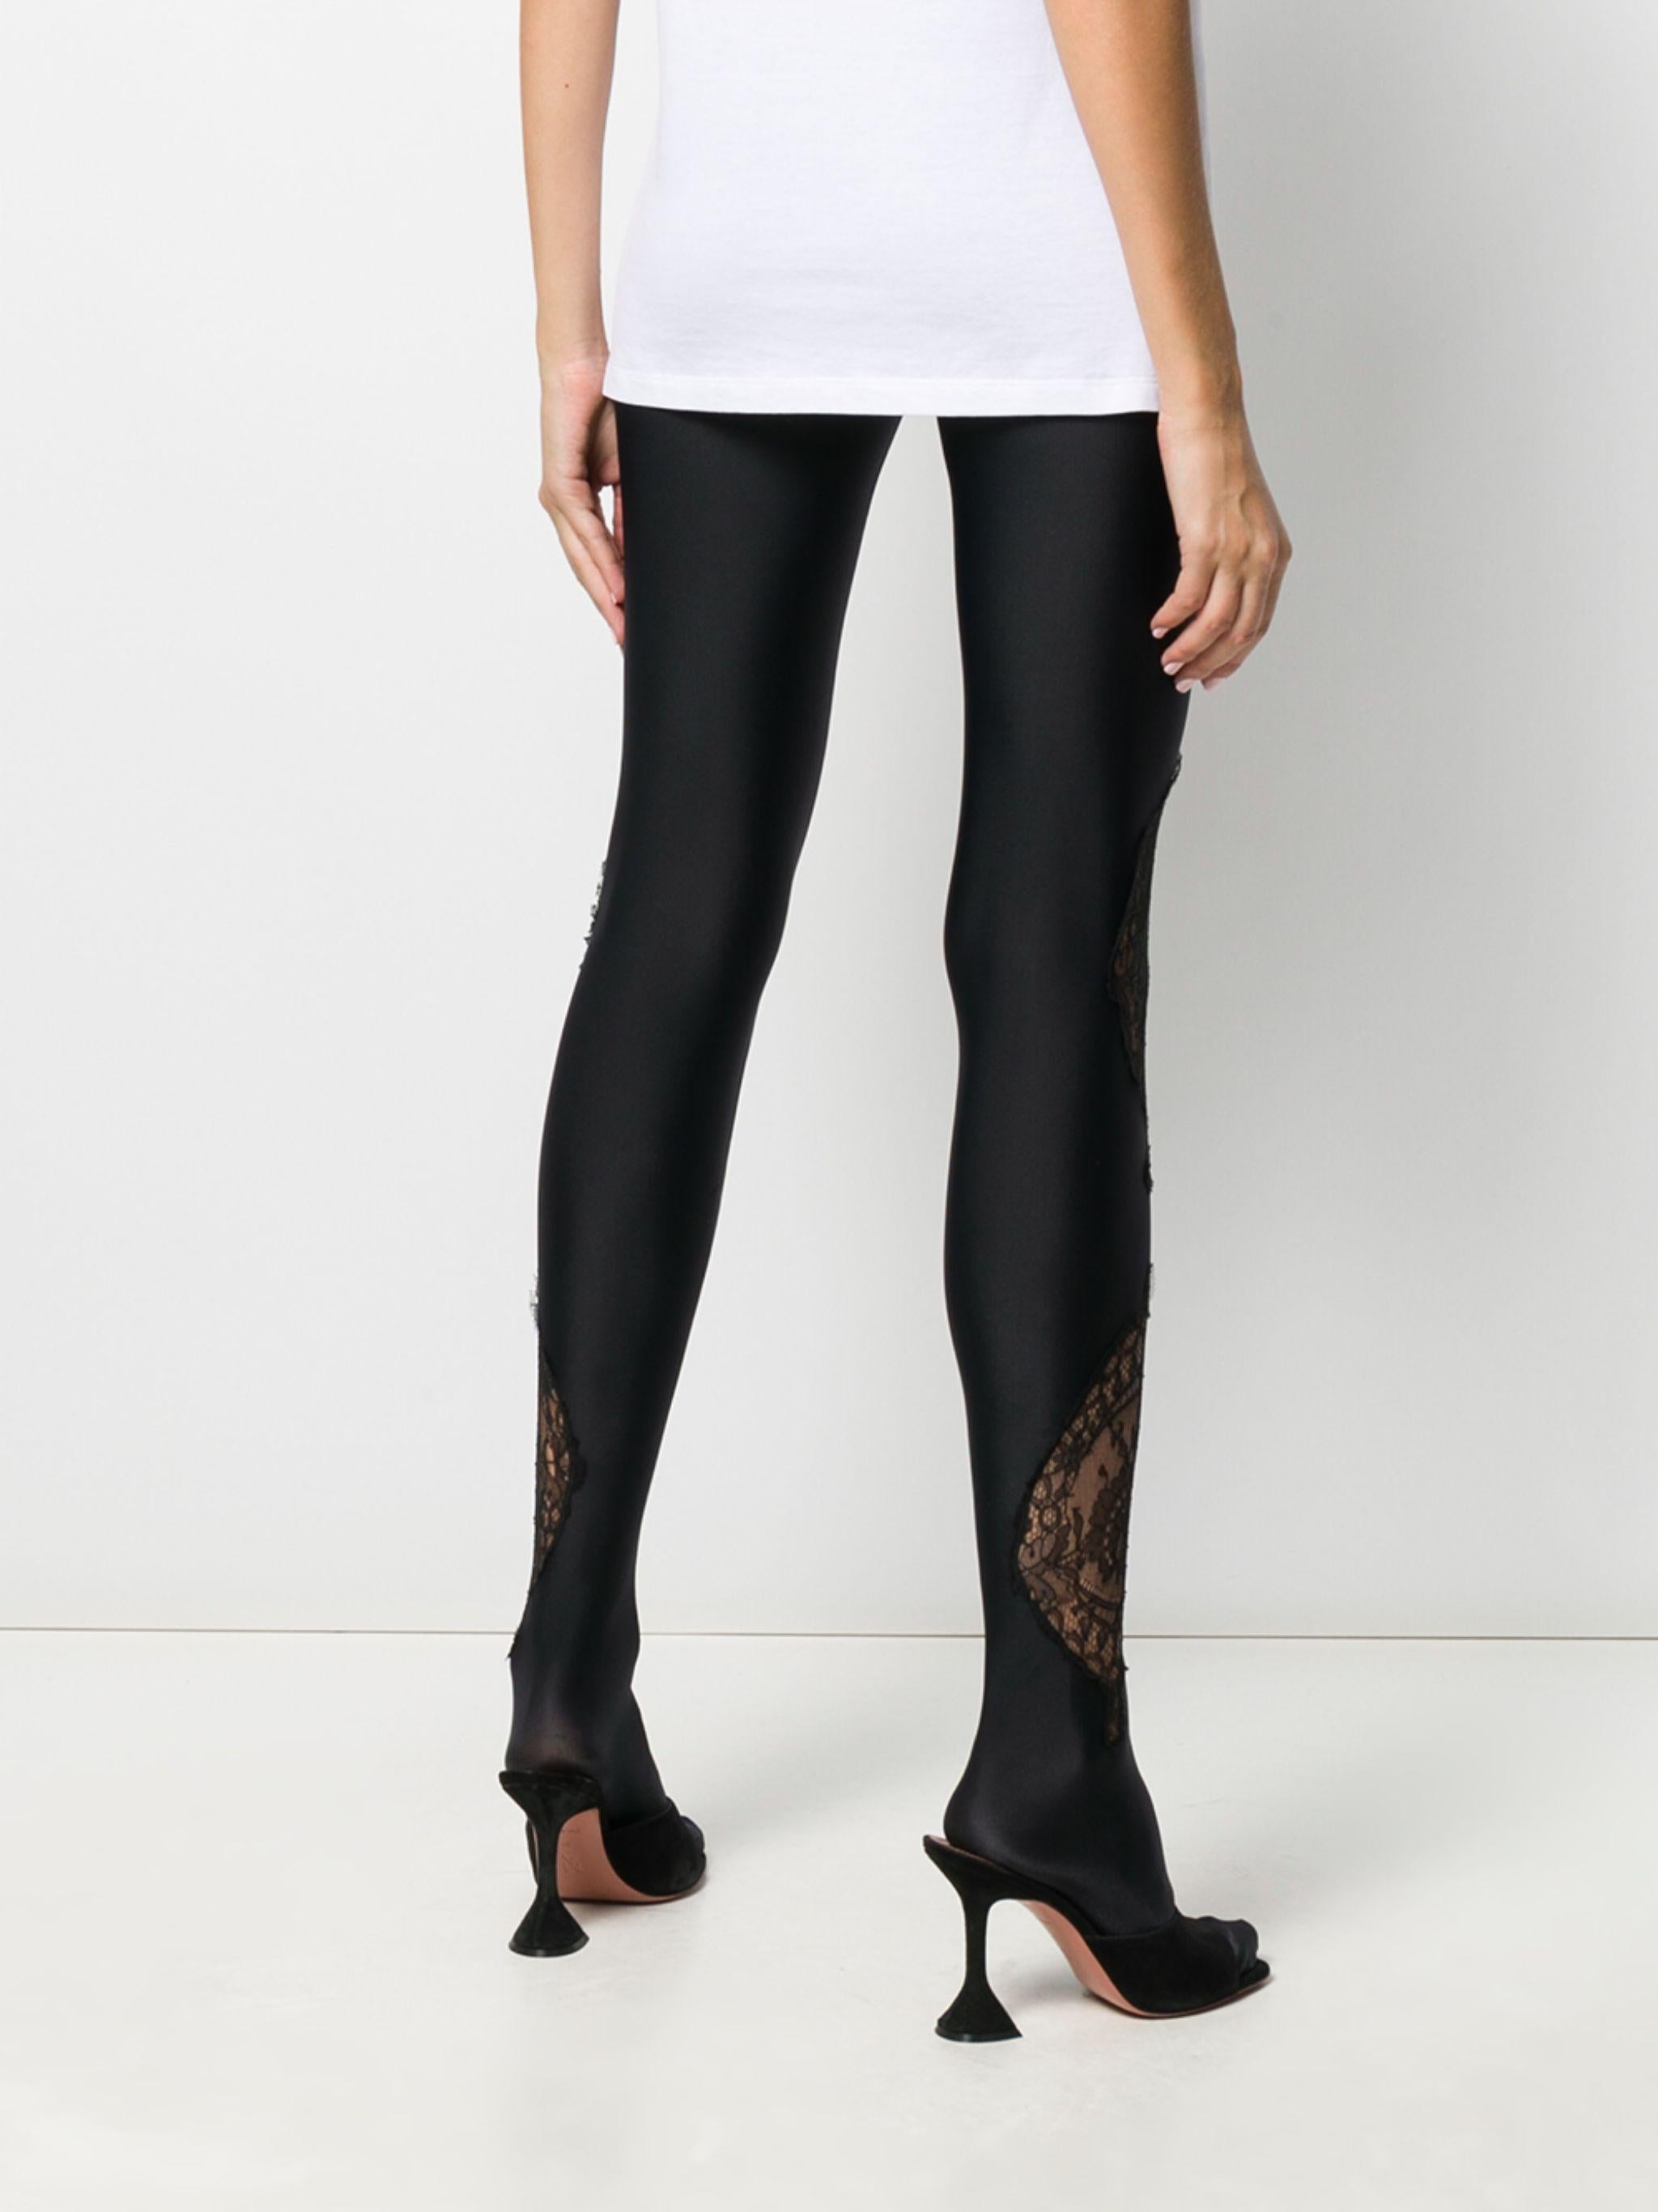 Versace Fall 2019 Runway Black Lace Panelled Jersey Leggings / Tights Size 1 9